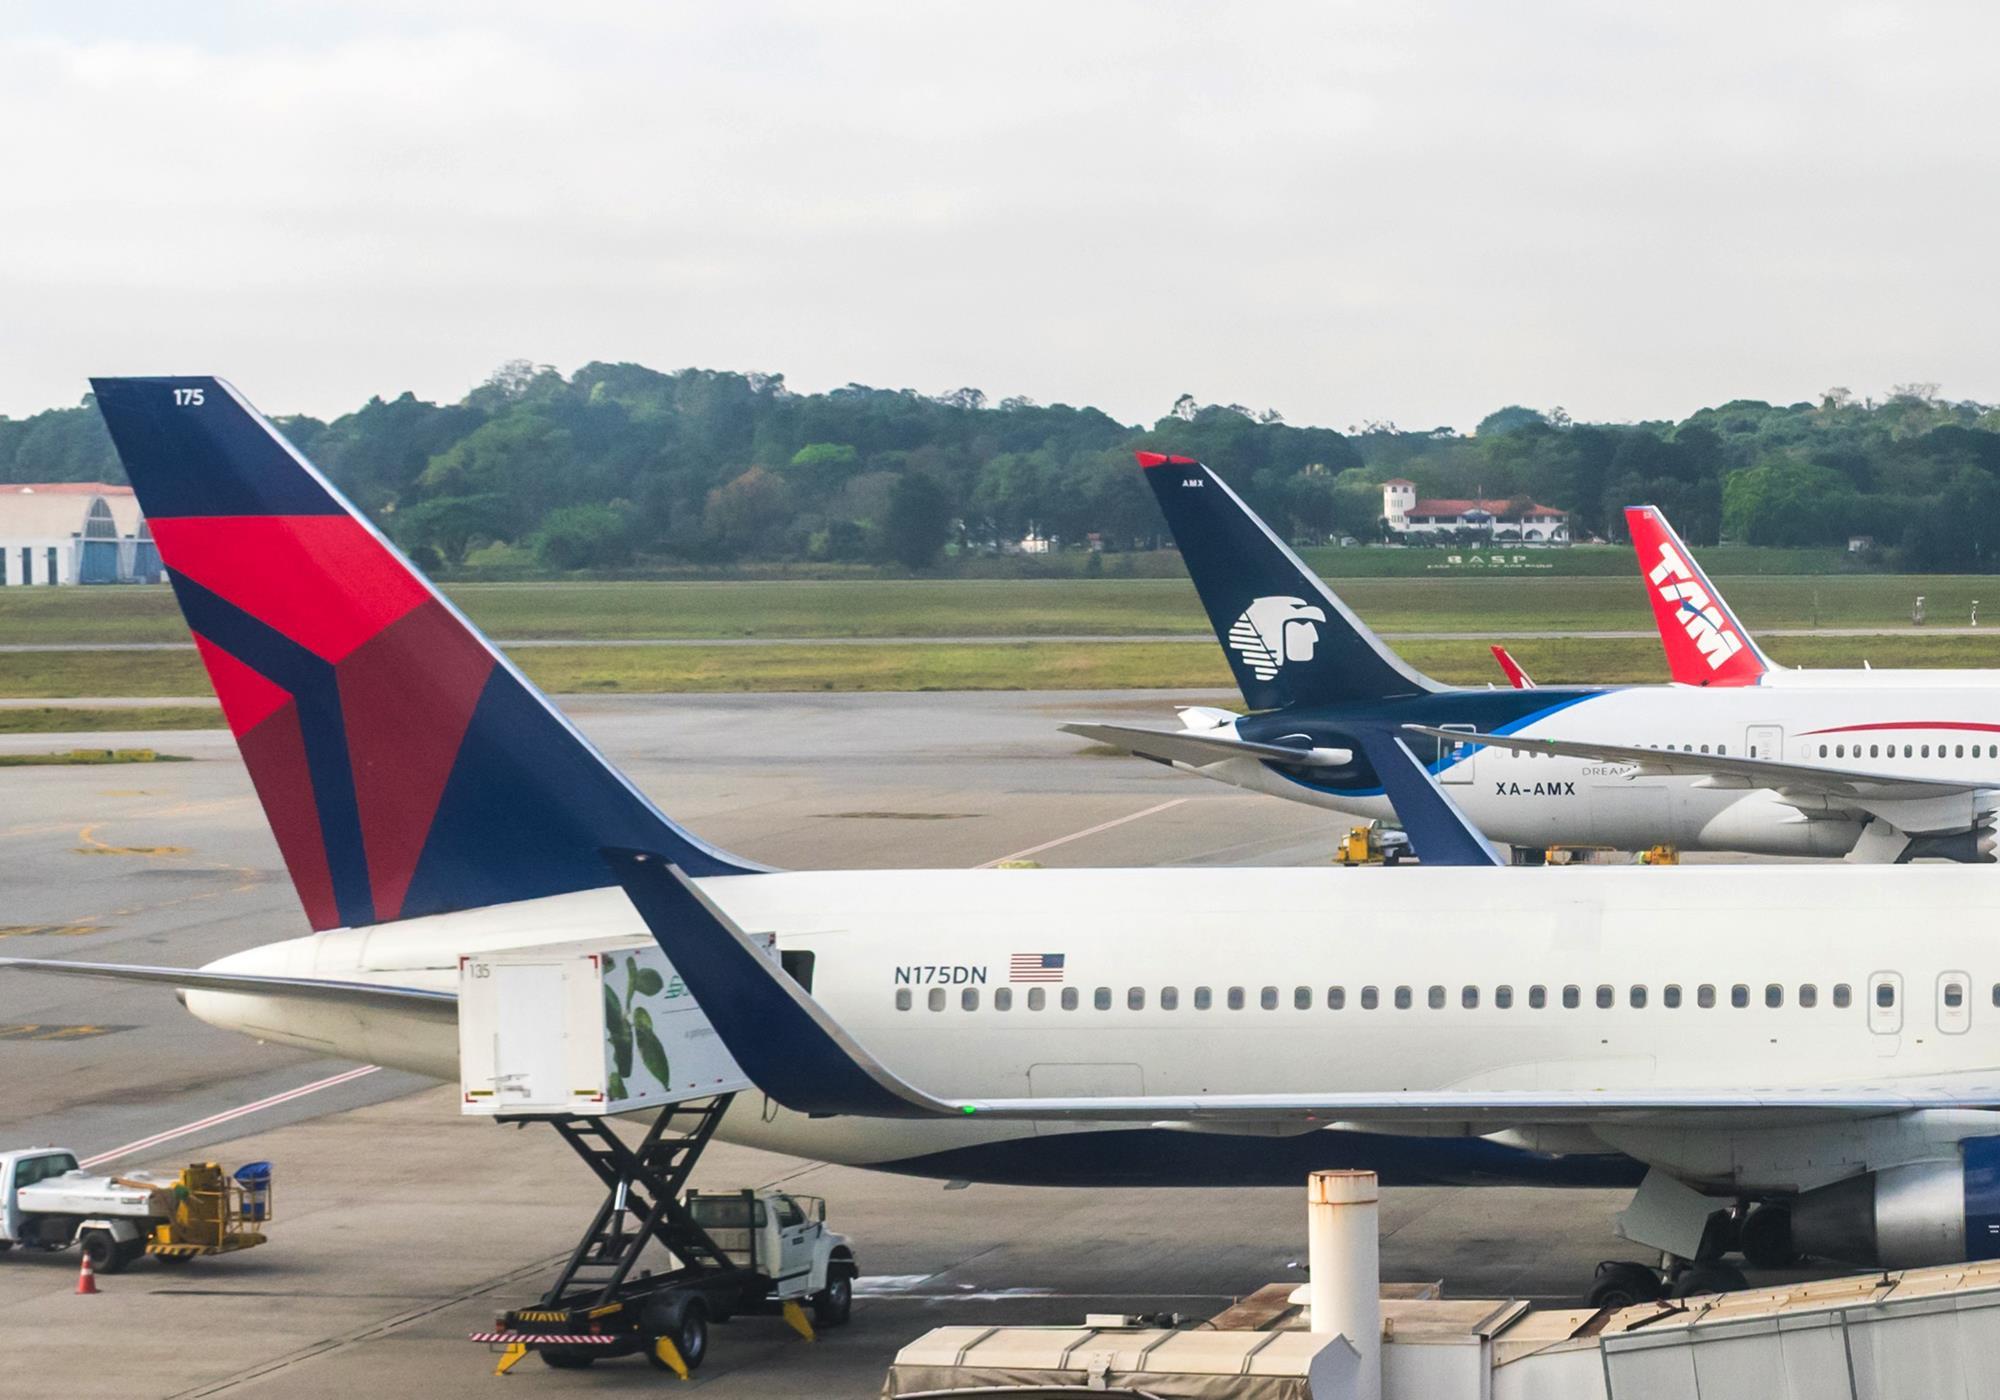 Focus: Delta bets on premium travel as 'shock absorber' for